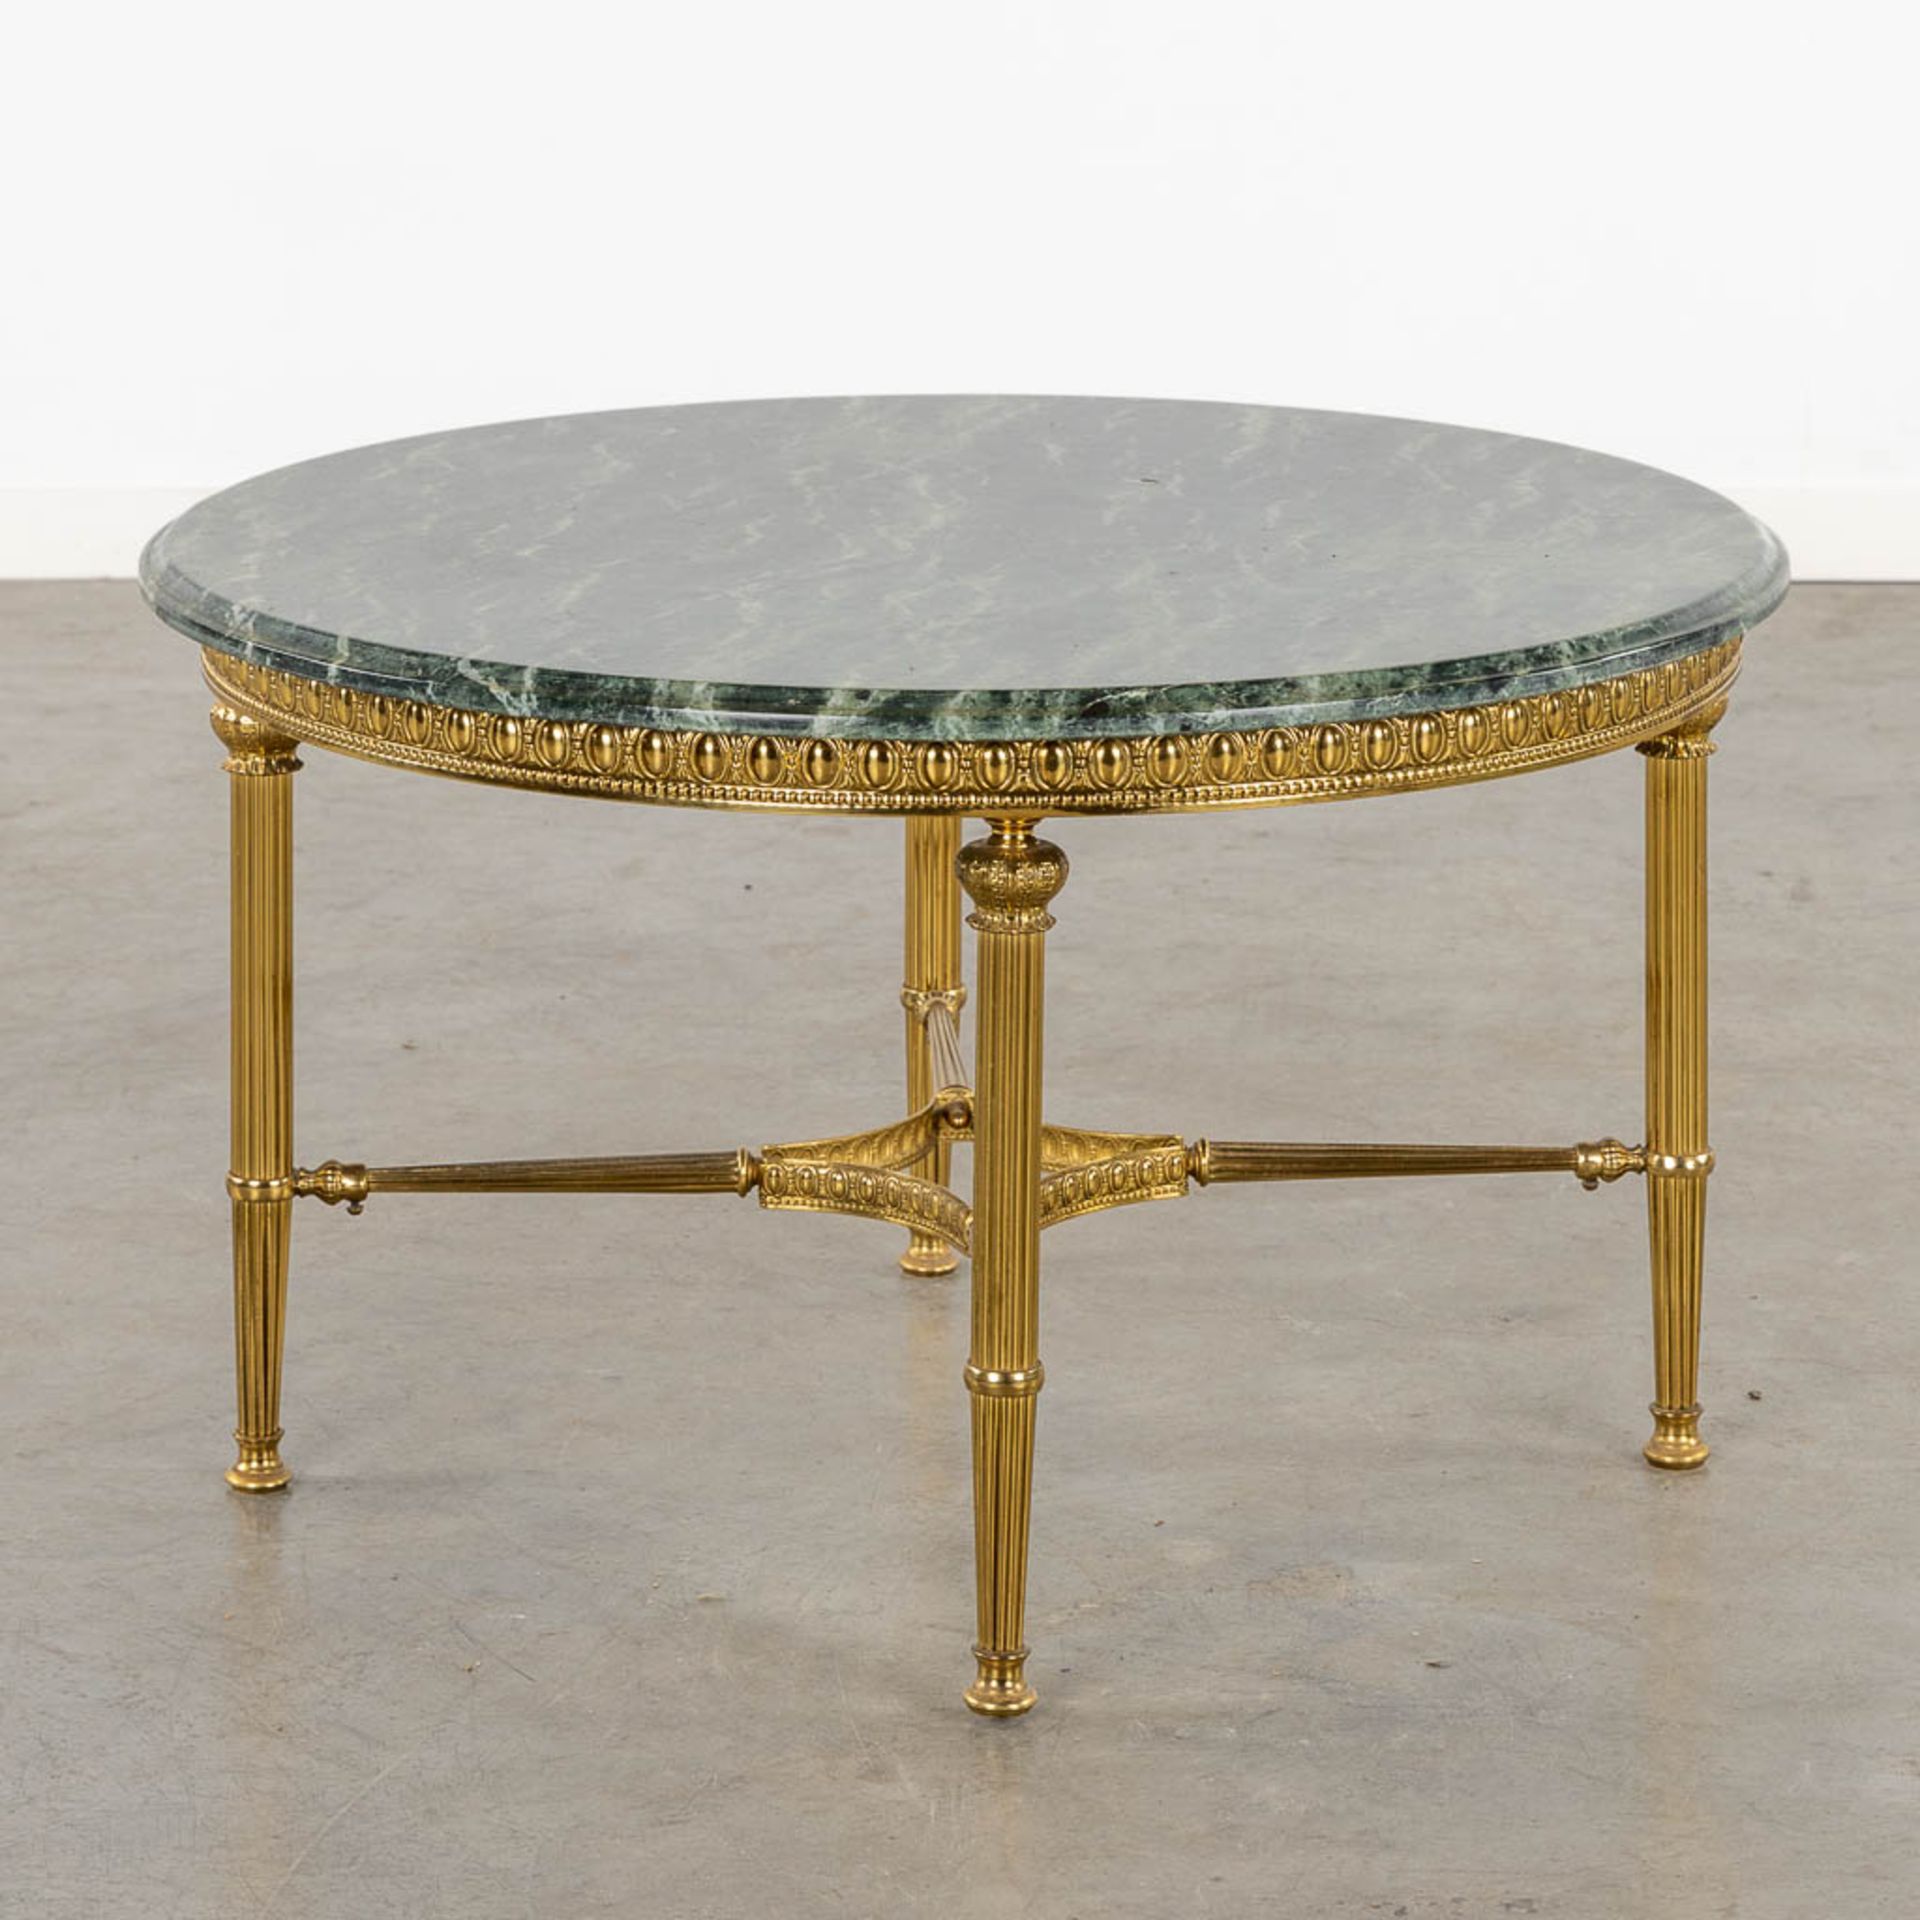 A brass coffee table with a green marble top. (H:46 x D:80 cm)